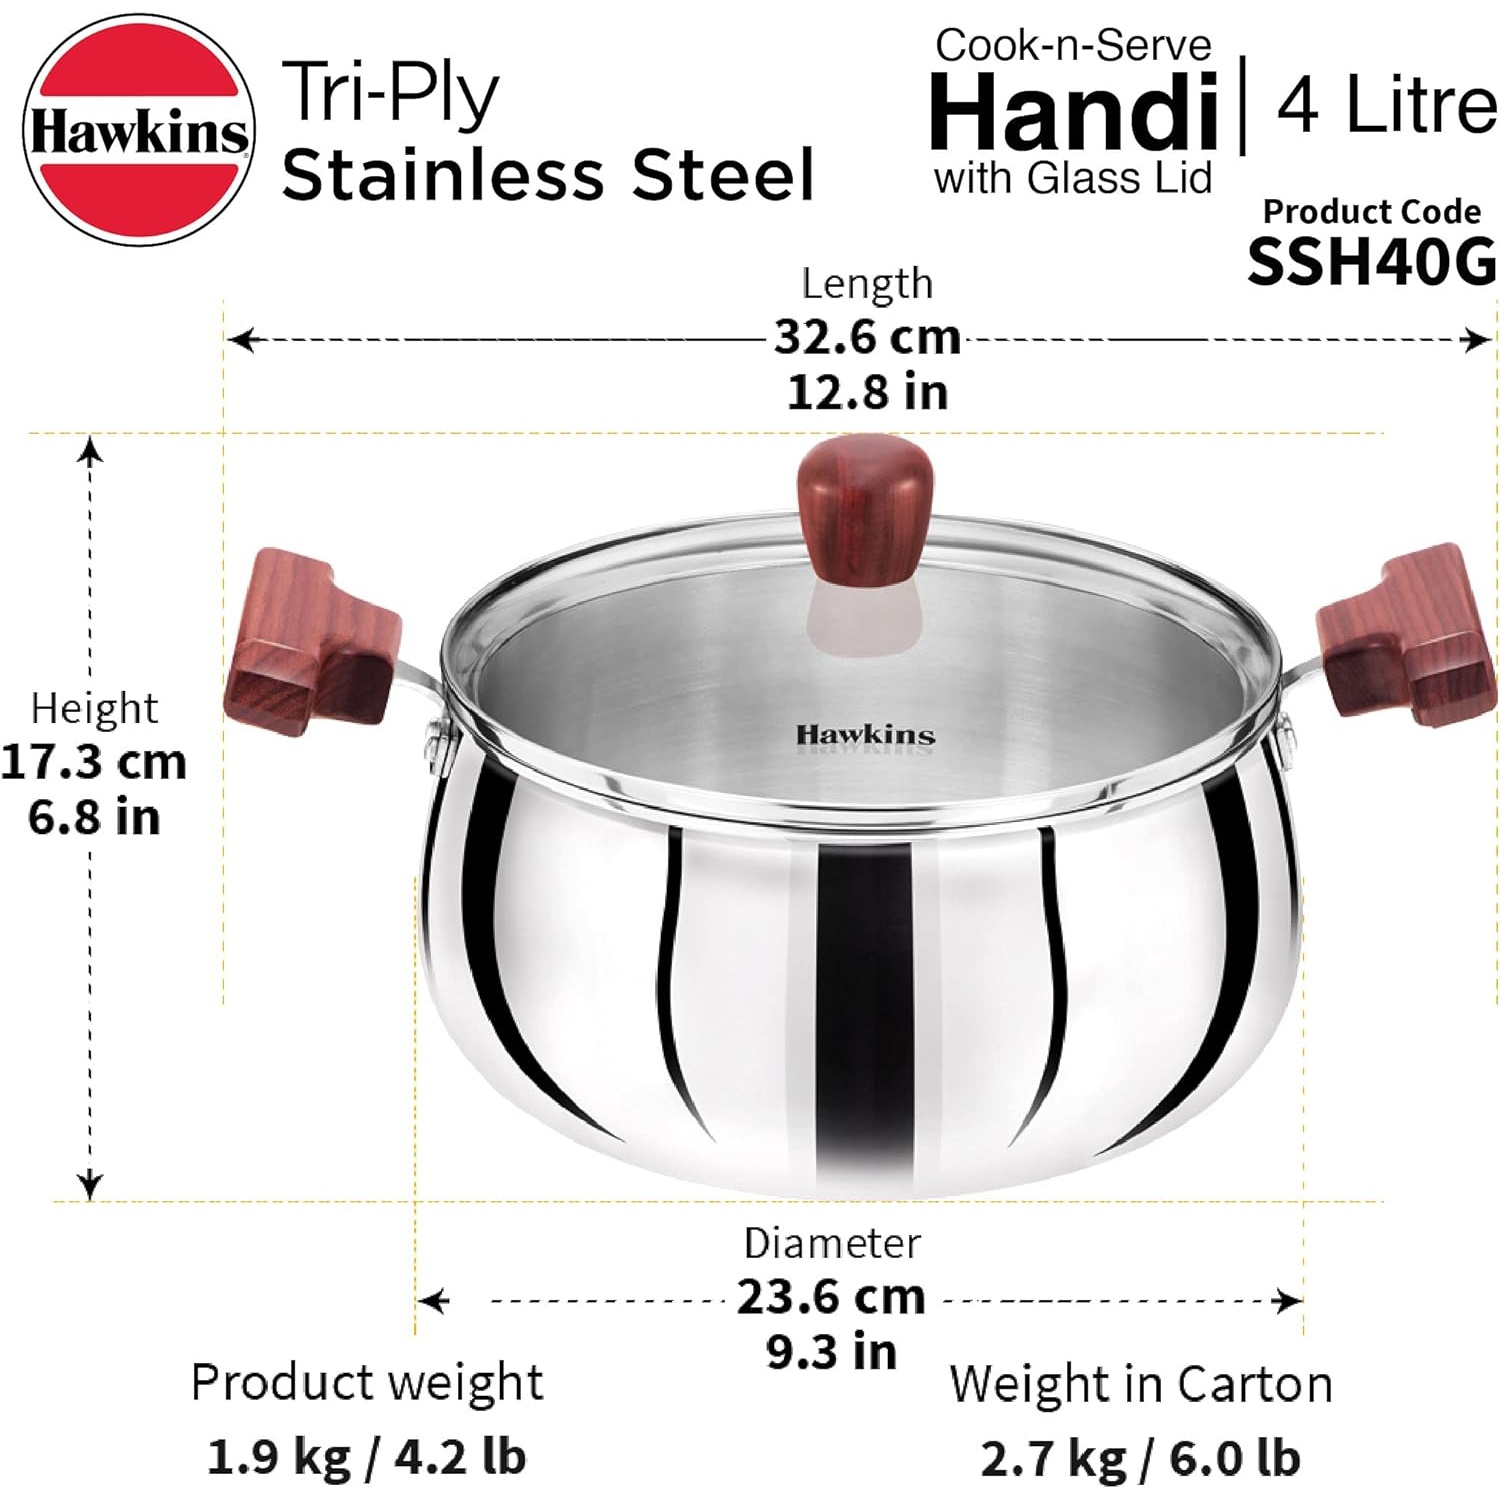 Hawkins Tri-ply Stainless Steel Handi 4 Litre With Glass Lid (SSH40G)